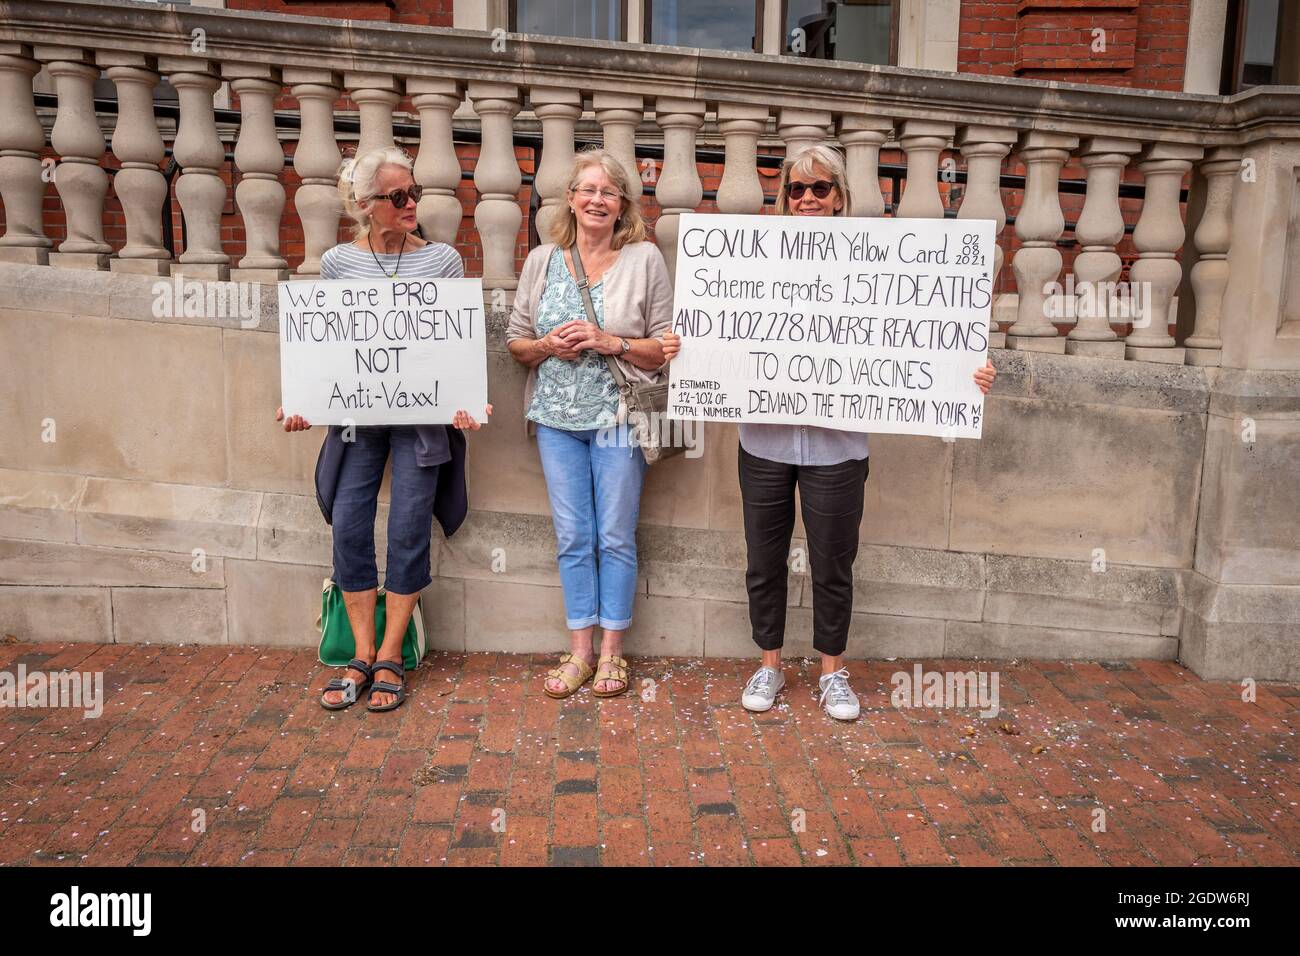 Eastbourne, August 13th 2021: Protestors worried about the government's Covid-19 vaccine rollout on the streets of Eastbourne Stock Photo